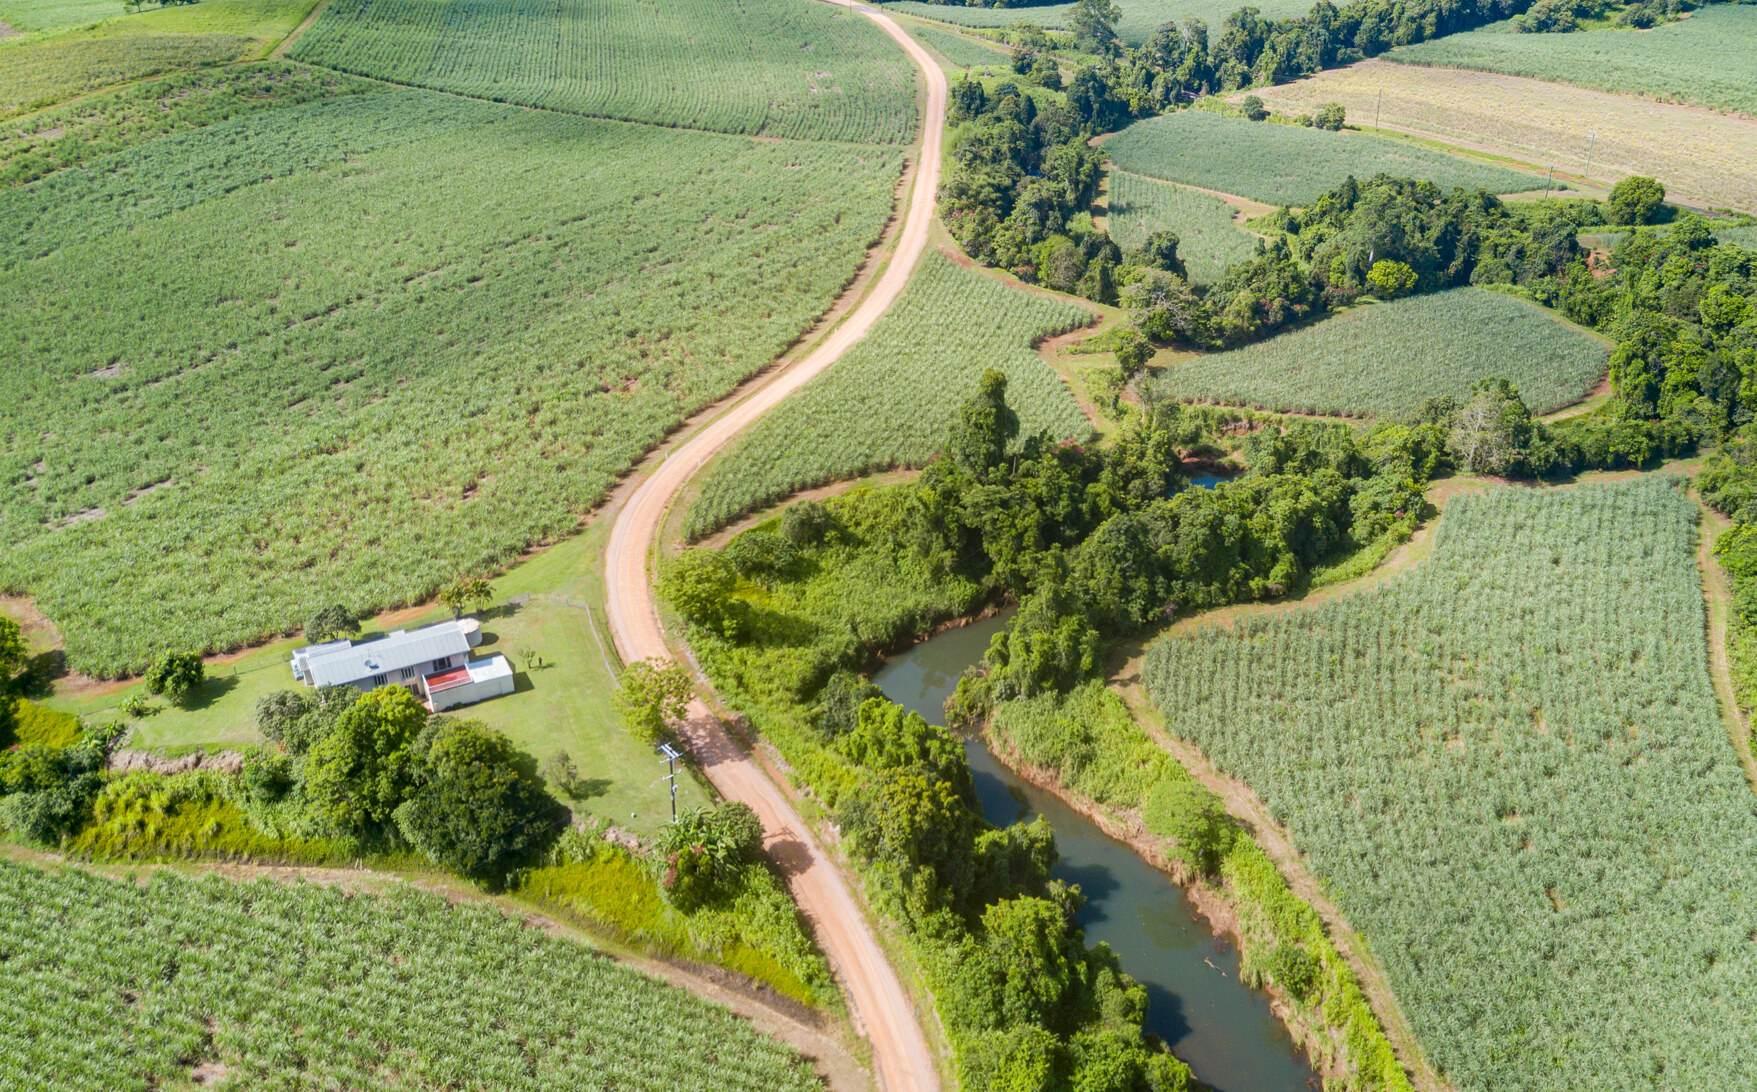 This rural property for sale North QLD also has a current water licence for extra irrigation if needed. There are 2 large farm sheds with some farming equipment.